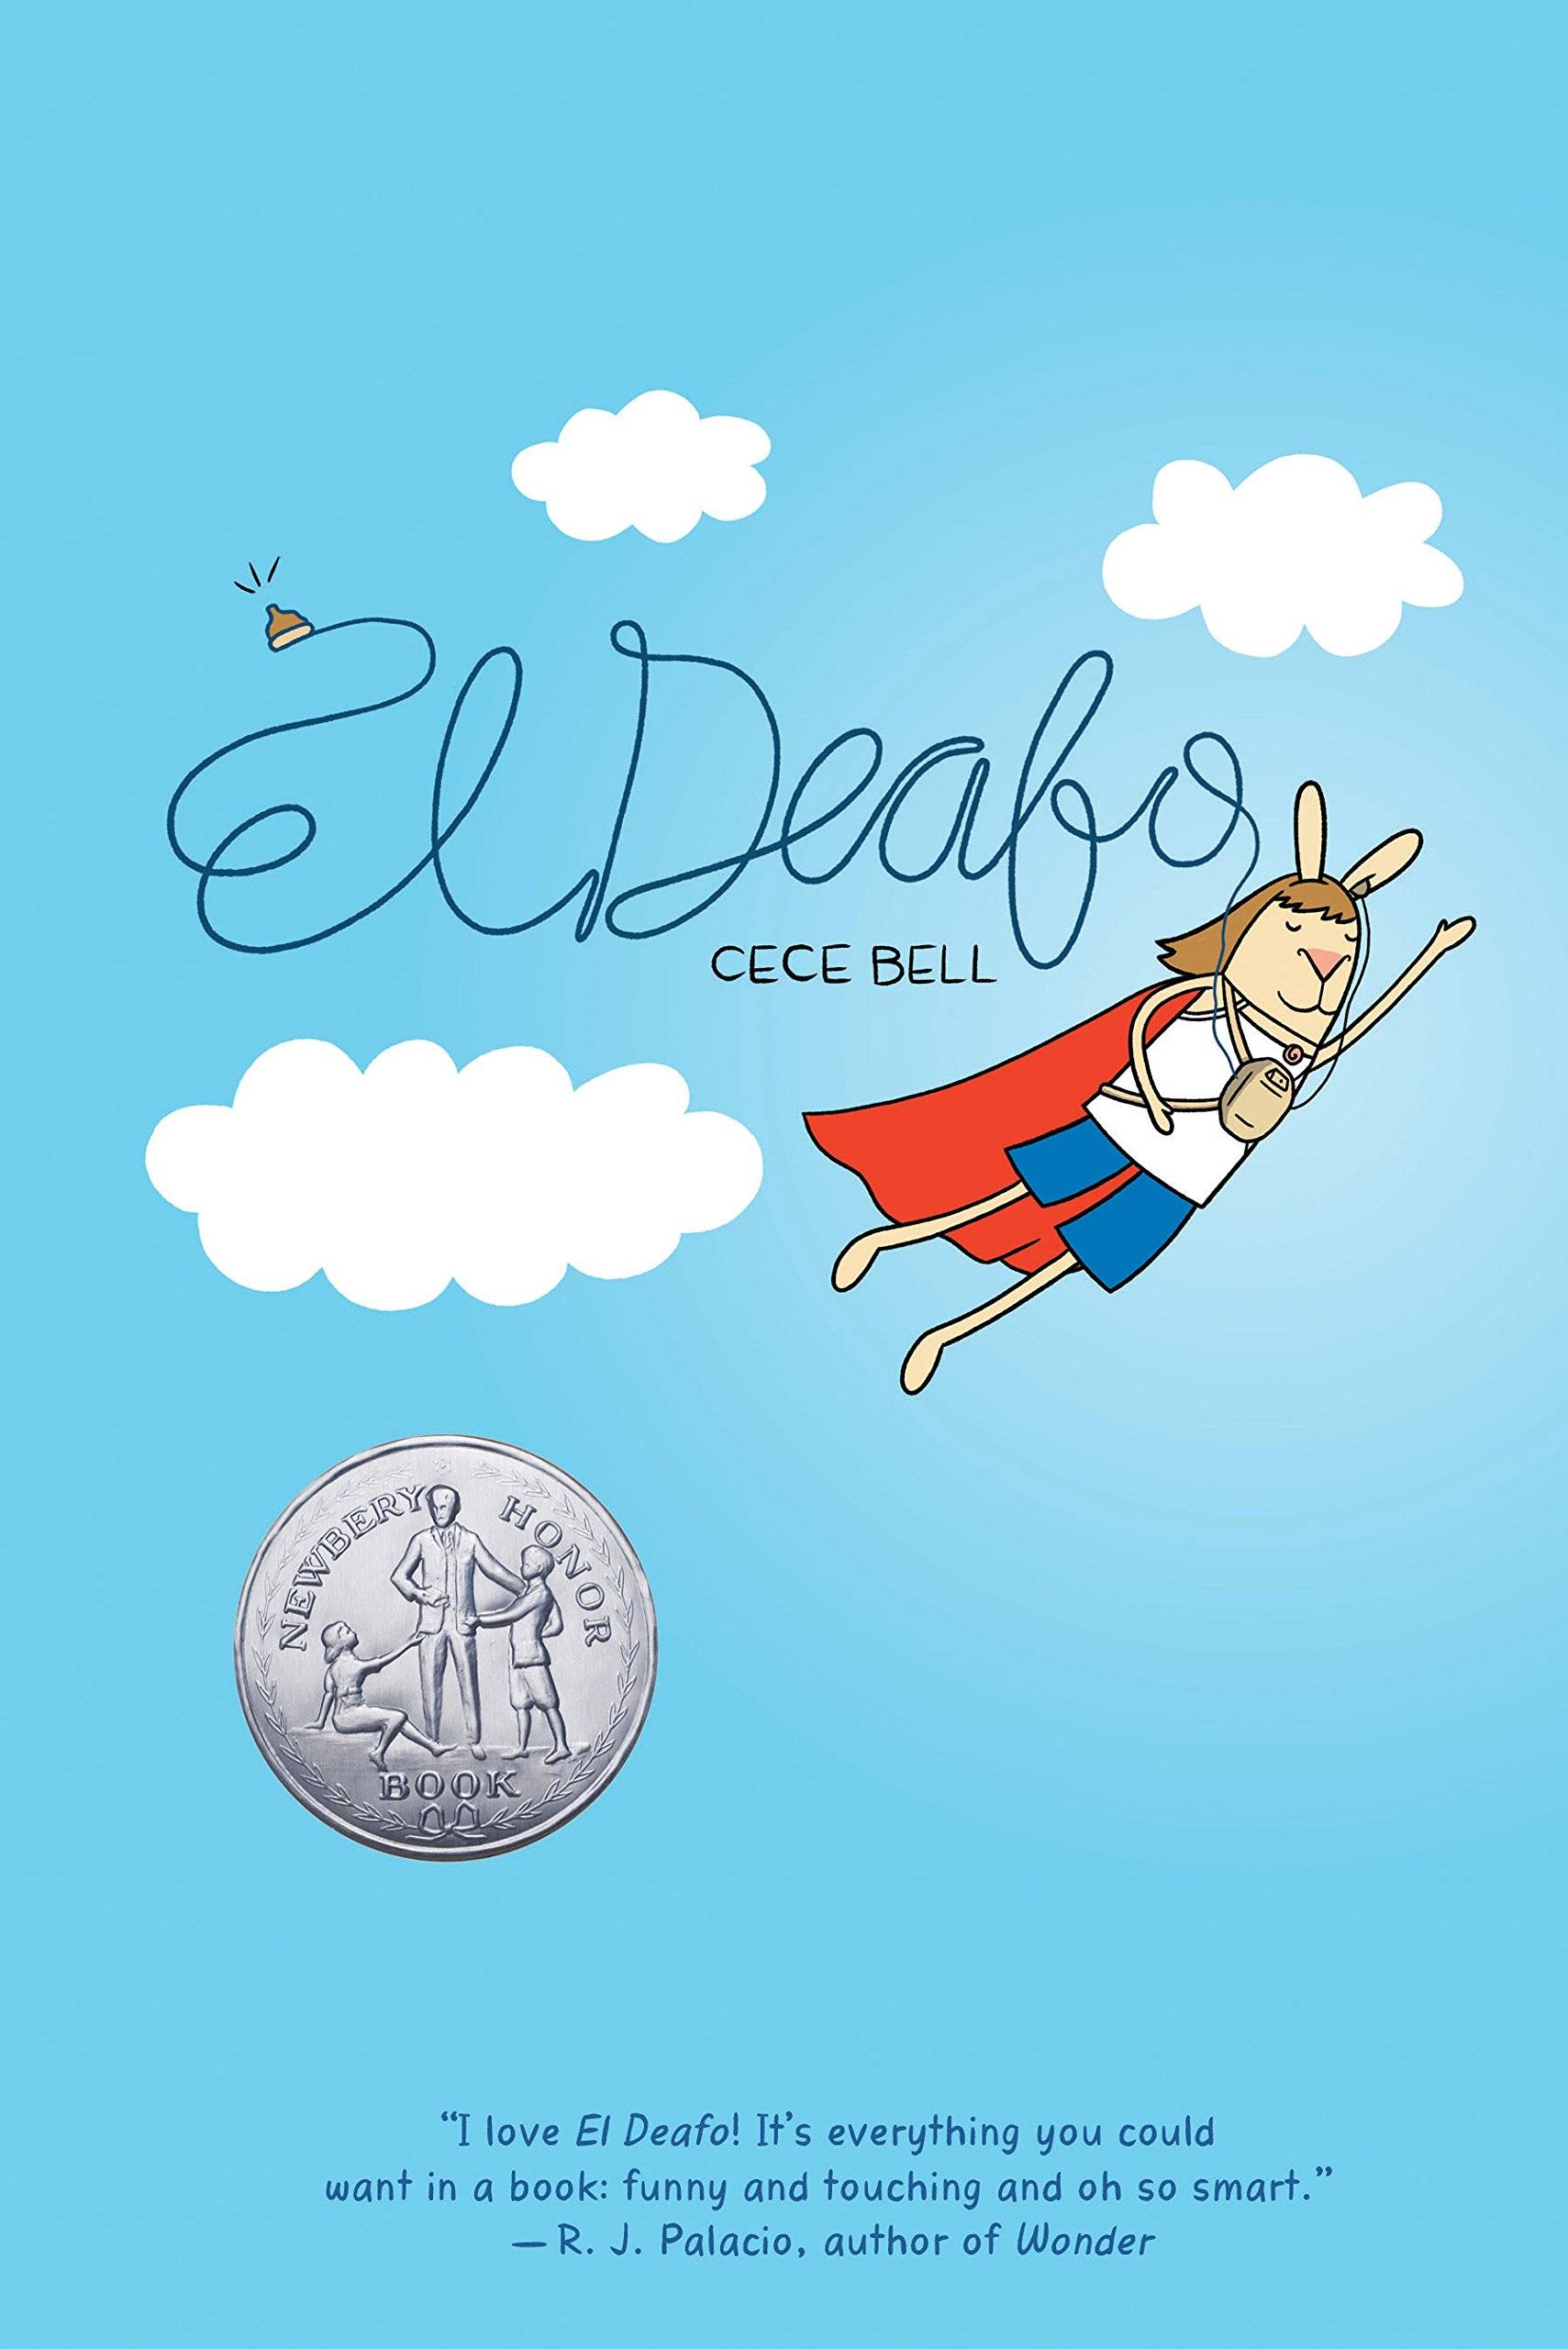 "El Deafo" book cover featuring an illustrated rabbit with a red cap flying through a blue sky.